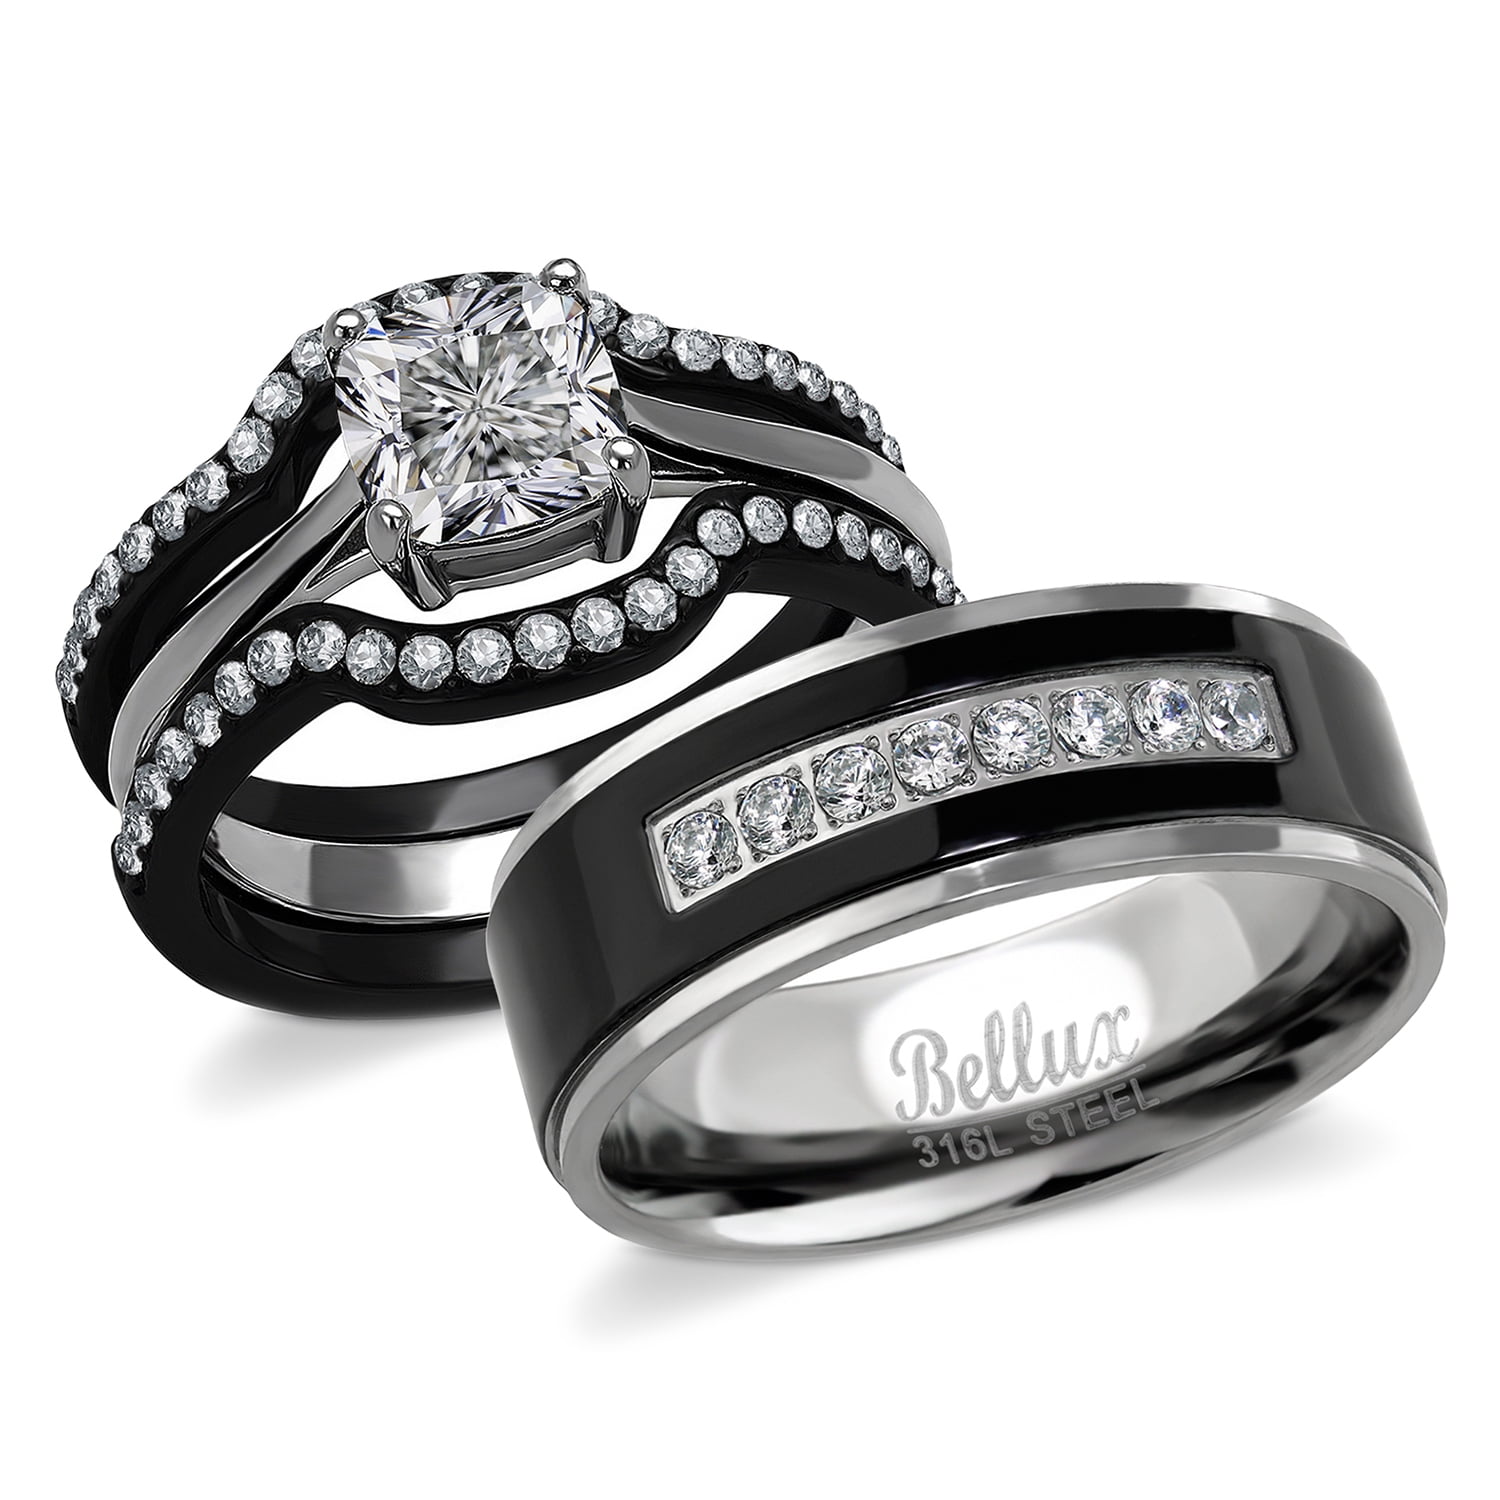 His Stainless Steel Black and Her Black plated cz engagement wedding ring set 